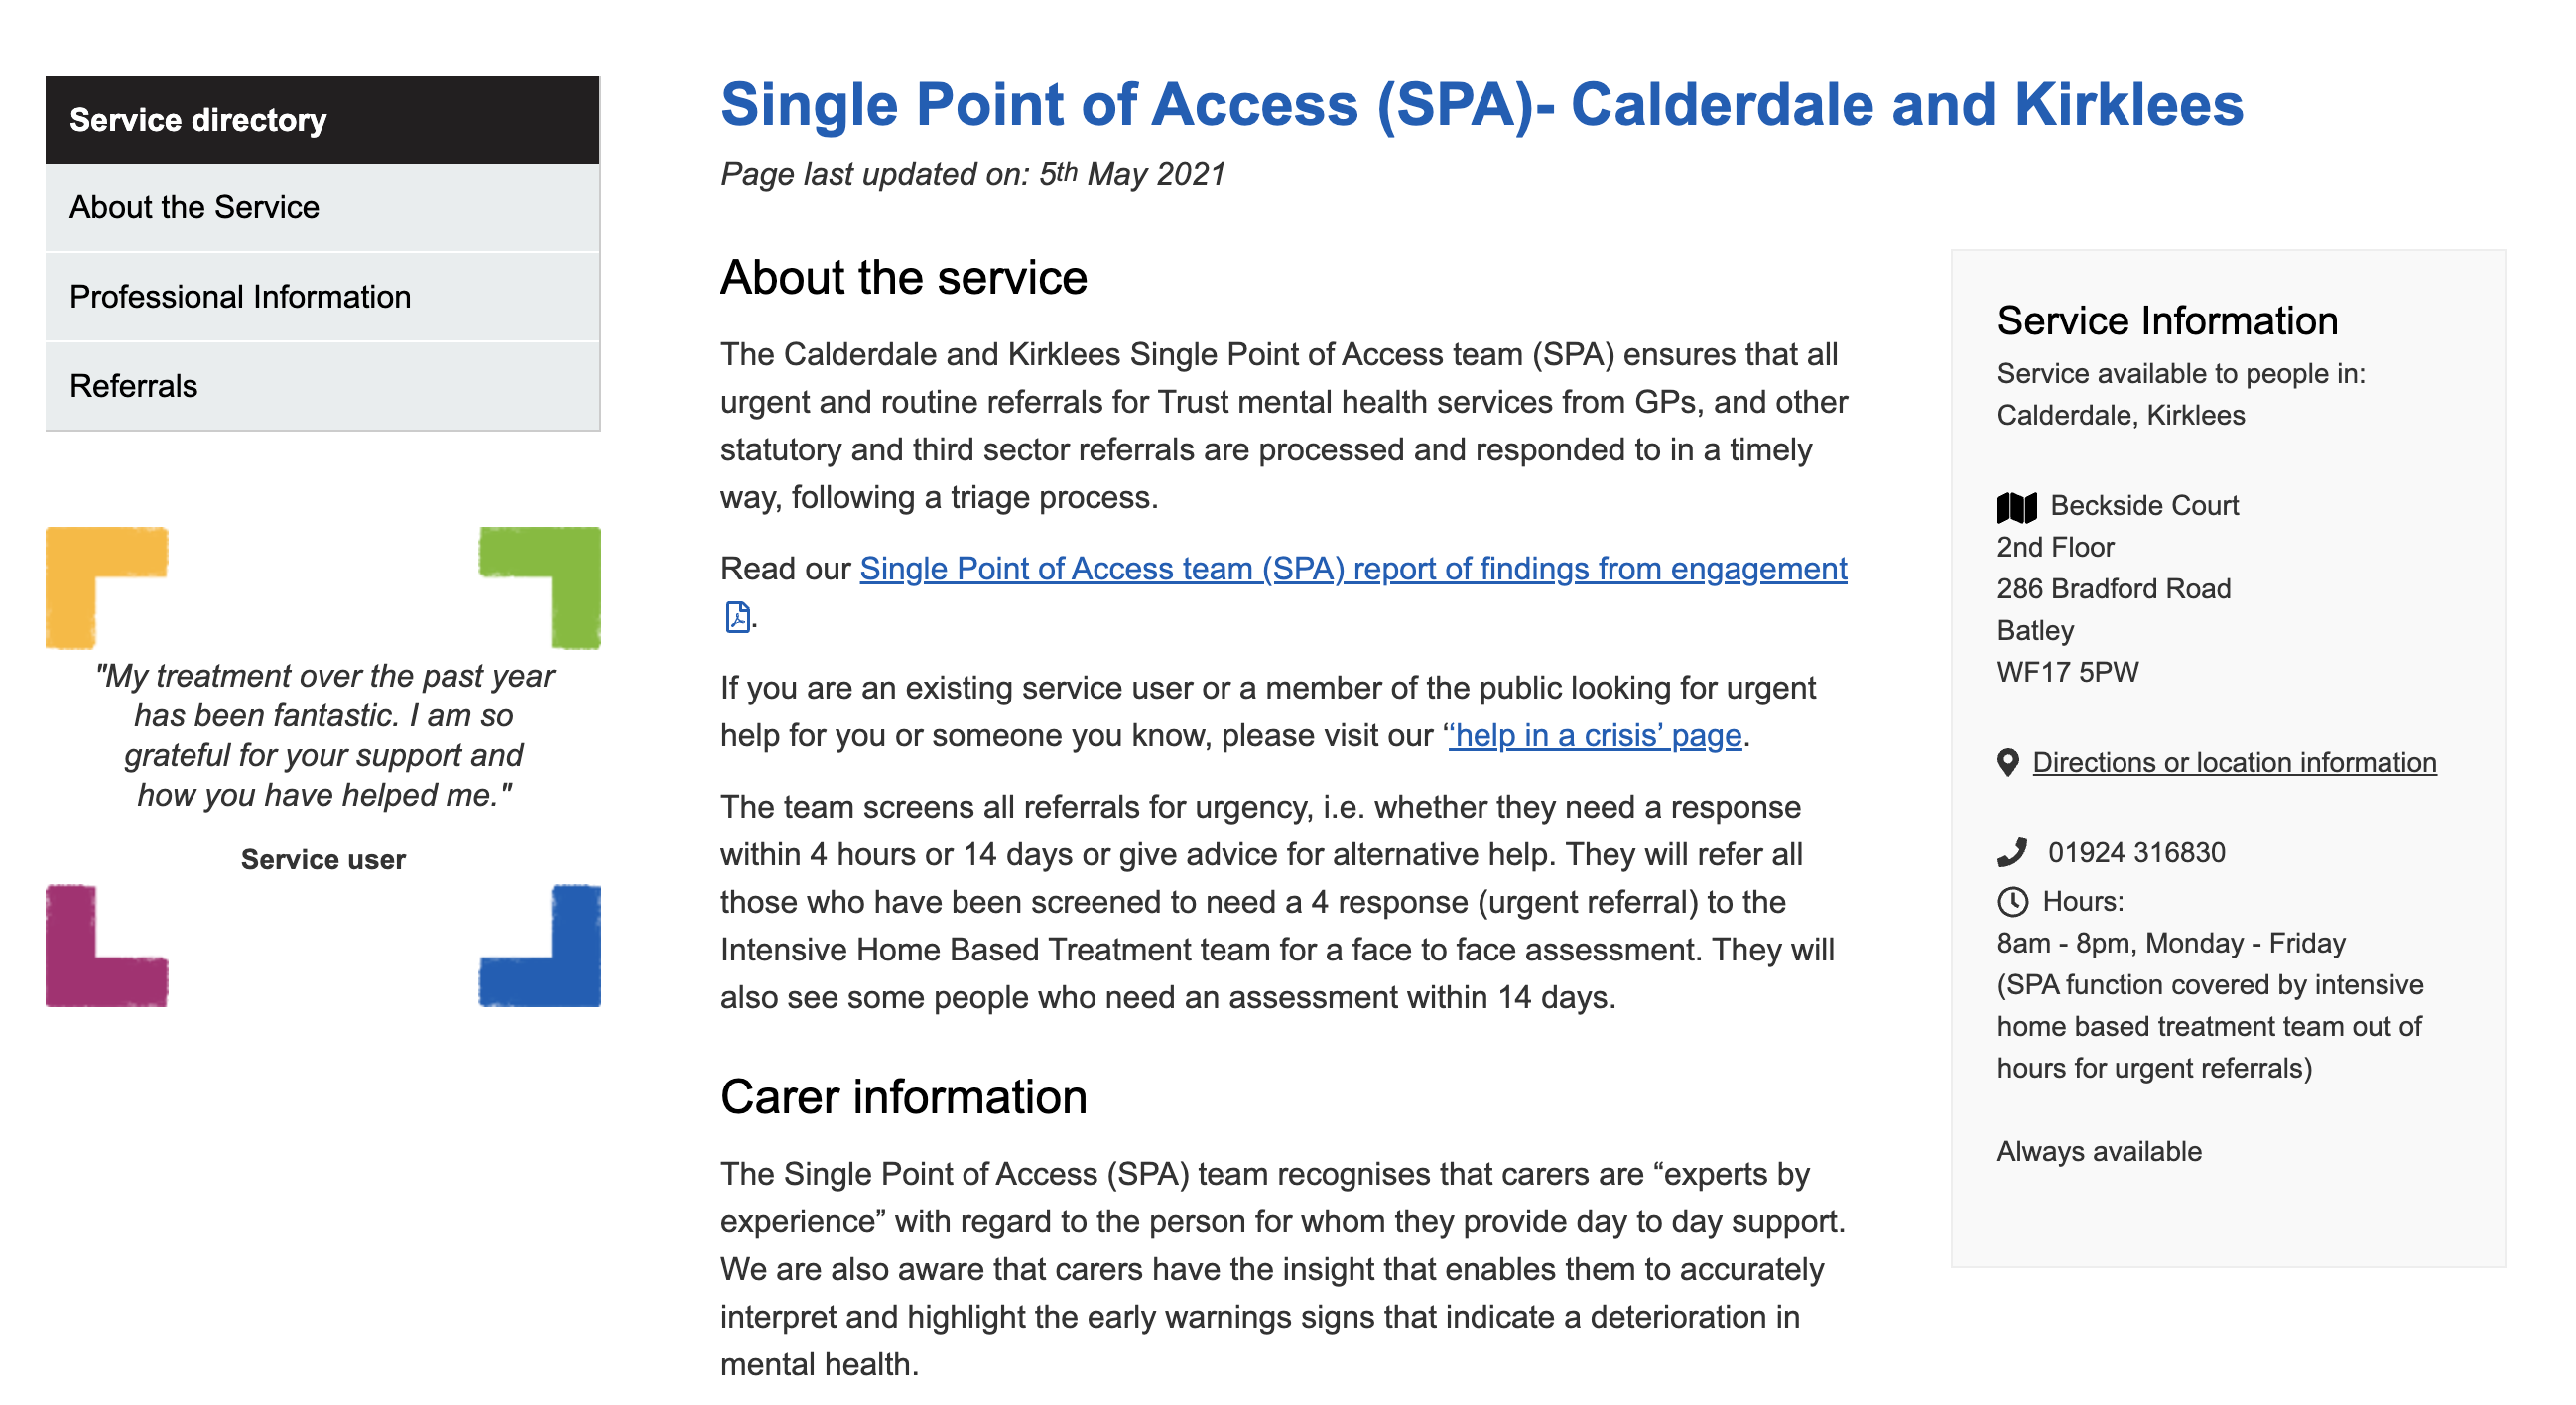 Single Point of Access – Calderdale and Kirklees website